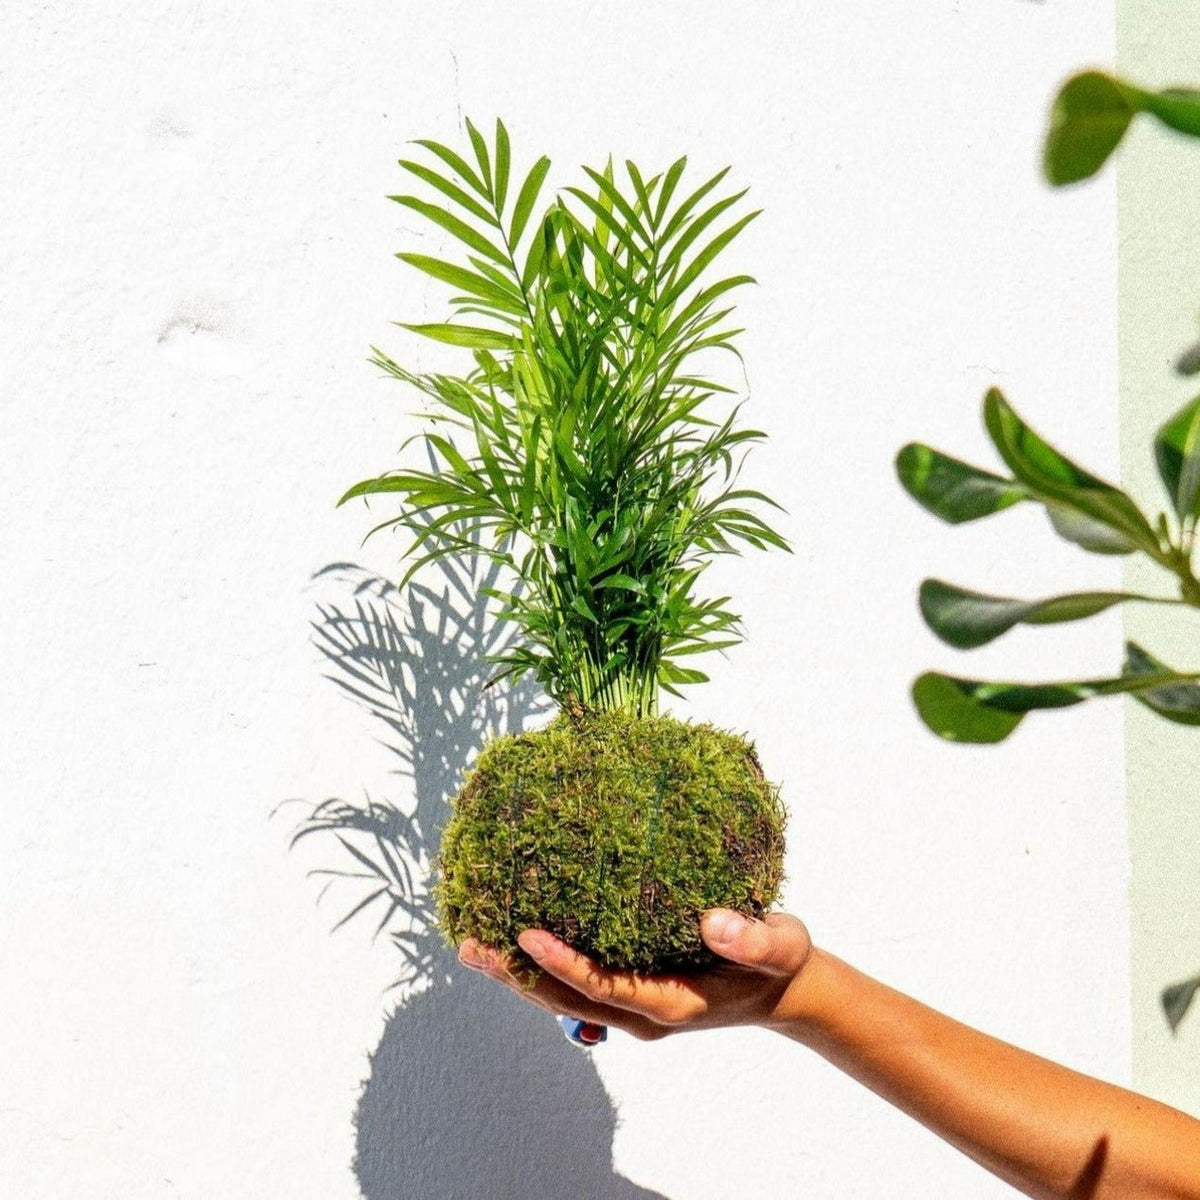 Kokedama Workshop with Jimmy Potter - Febraury 10 from 11:30 am - 1:30 pm. - Gift & Gather